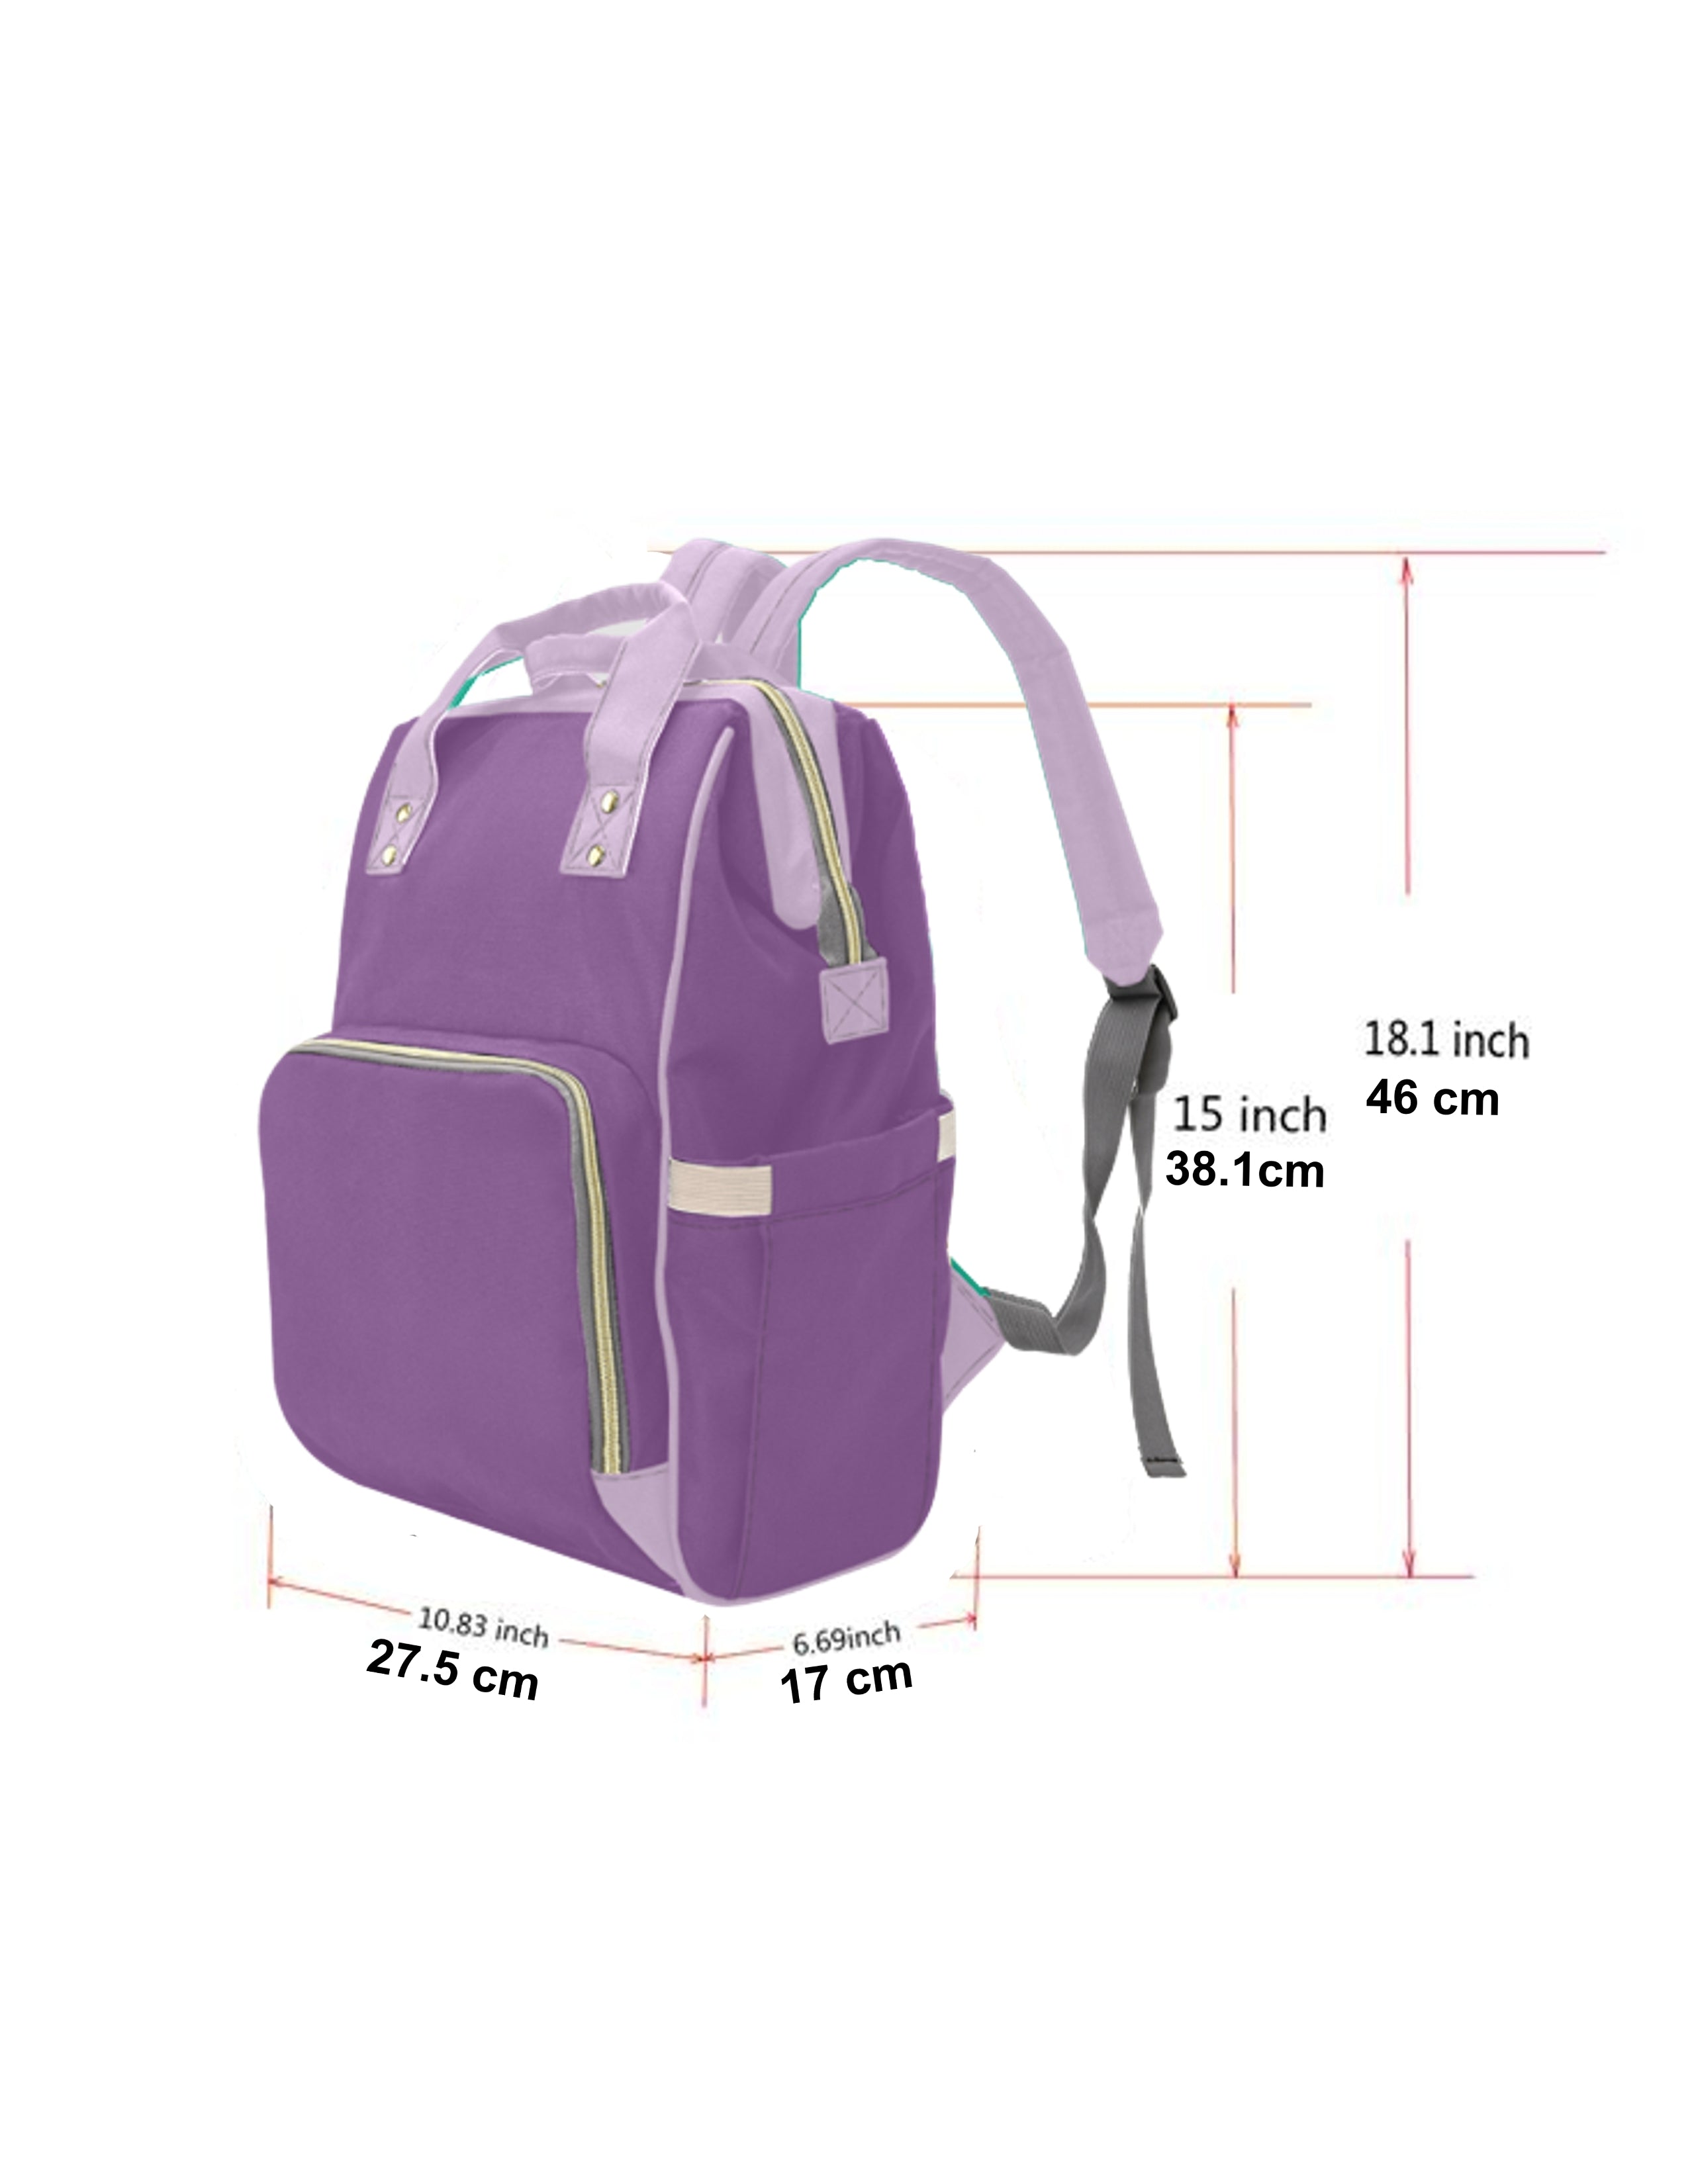 Ants - Multi-Function Backpack Nappy Bag